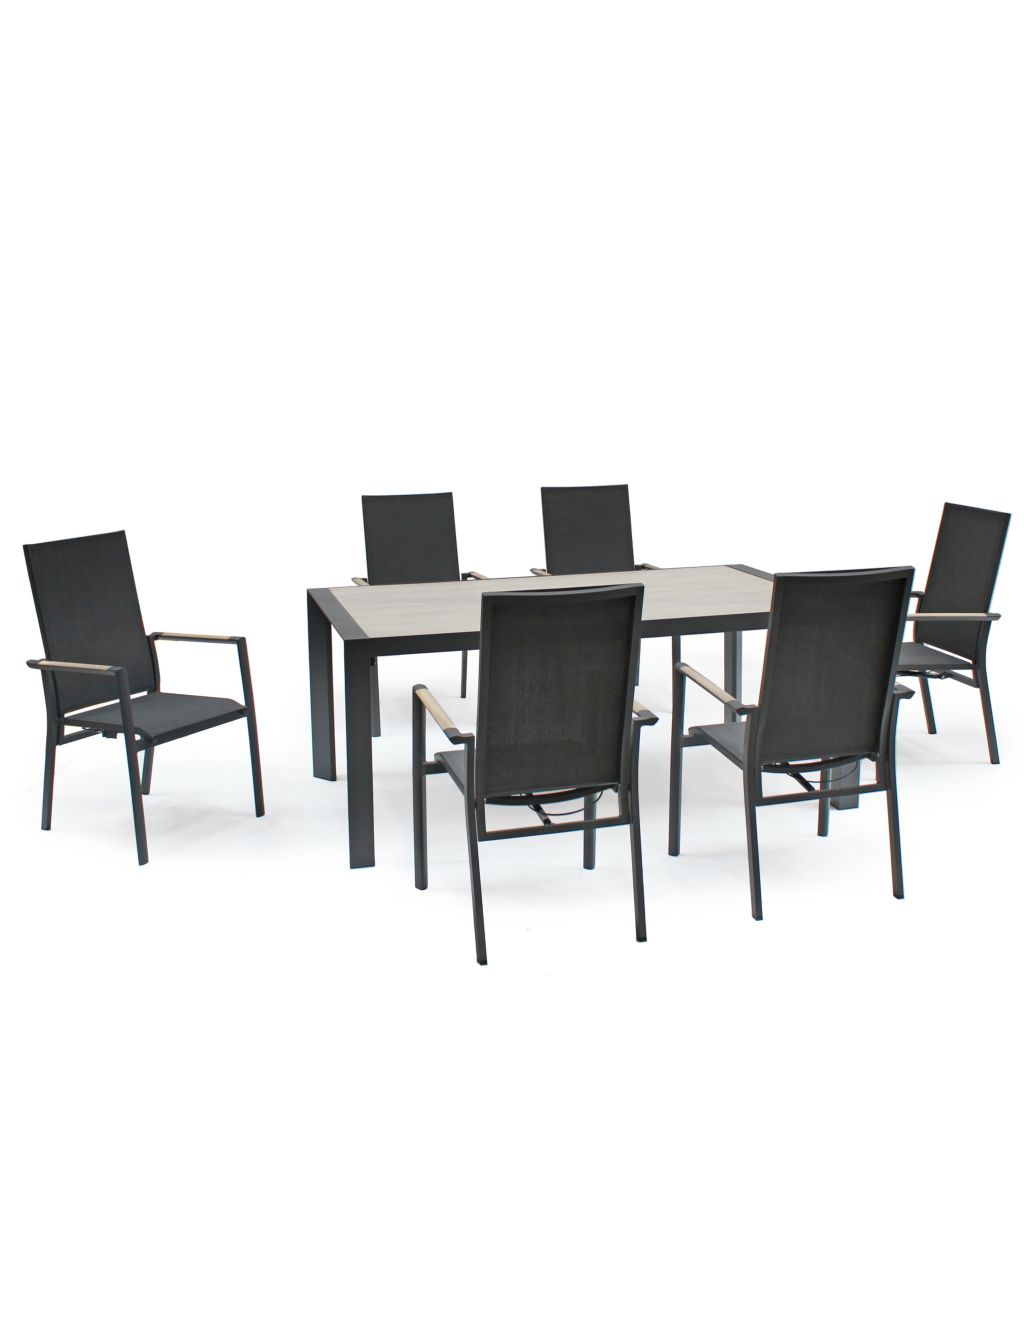 Surf Active 6 Seater Garden Dining Set 1 of 6